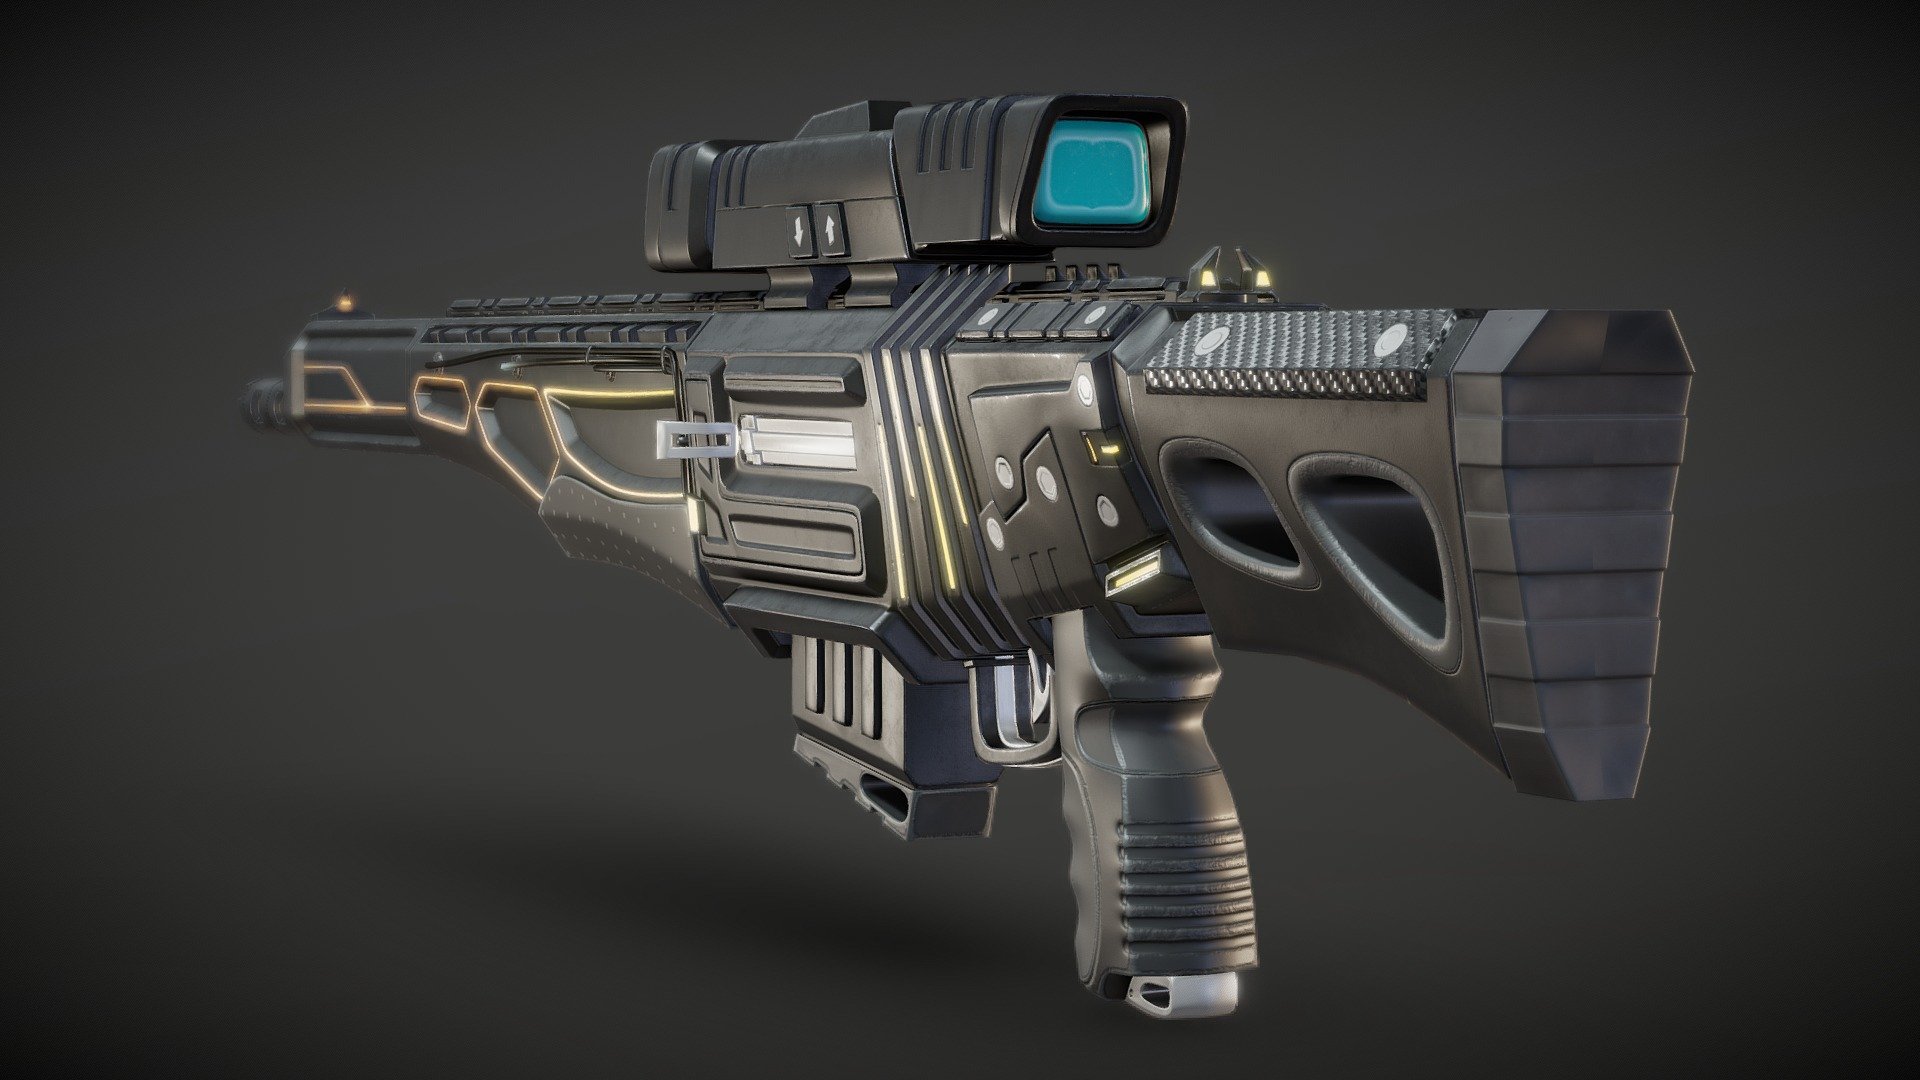 hermite charged sniper rifle ready to business , i made this one on my free time inspired from the futuristic weapon style in apex legends video game , the weapon will use thermite ignited bullets that will penetrate heavy armors and melt down skulls . 
i originaly made this one to learn making weapon skins for games and i will upload some skins in next few days.
this is the low poly pbr version of my original rifle i published on behance
https://www.behance.net/gallery/135046919/thermite-charged-sniper-rifle - thermite charged sniper rifle - 3D model by Ahmed Mamdouh (@ahmed14456) 3d model